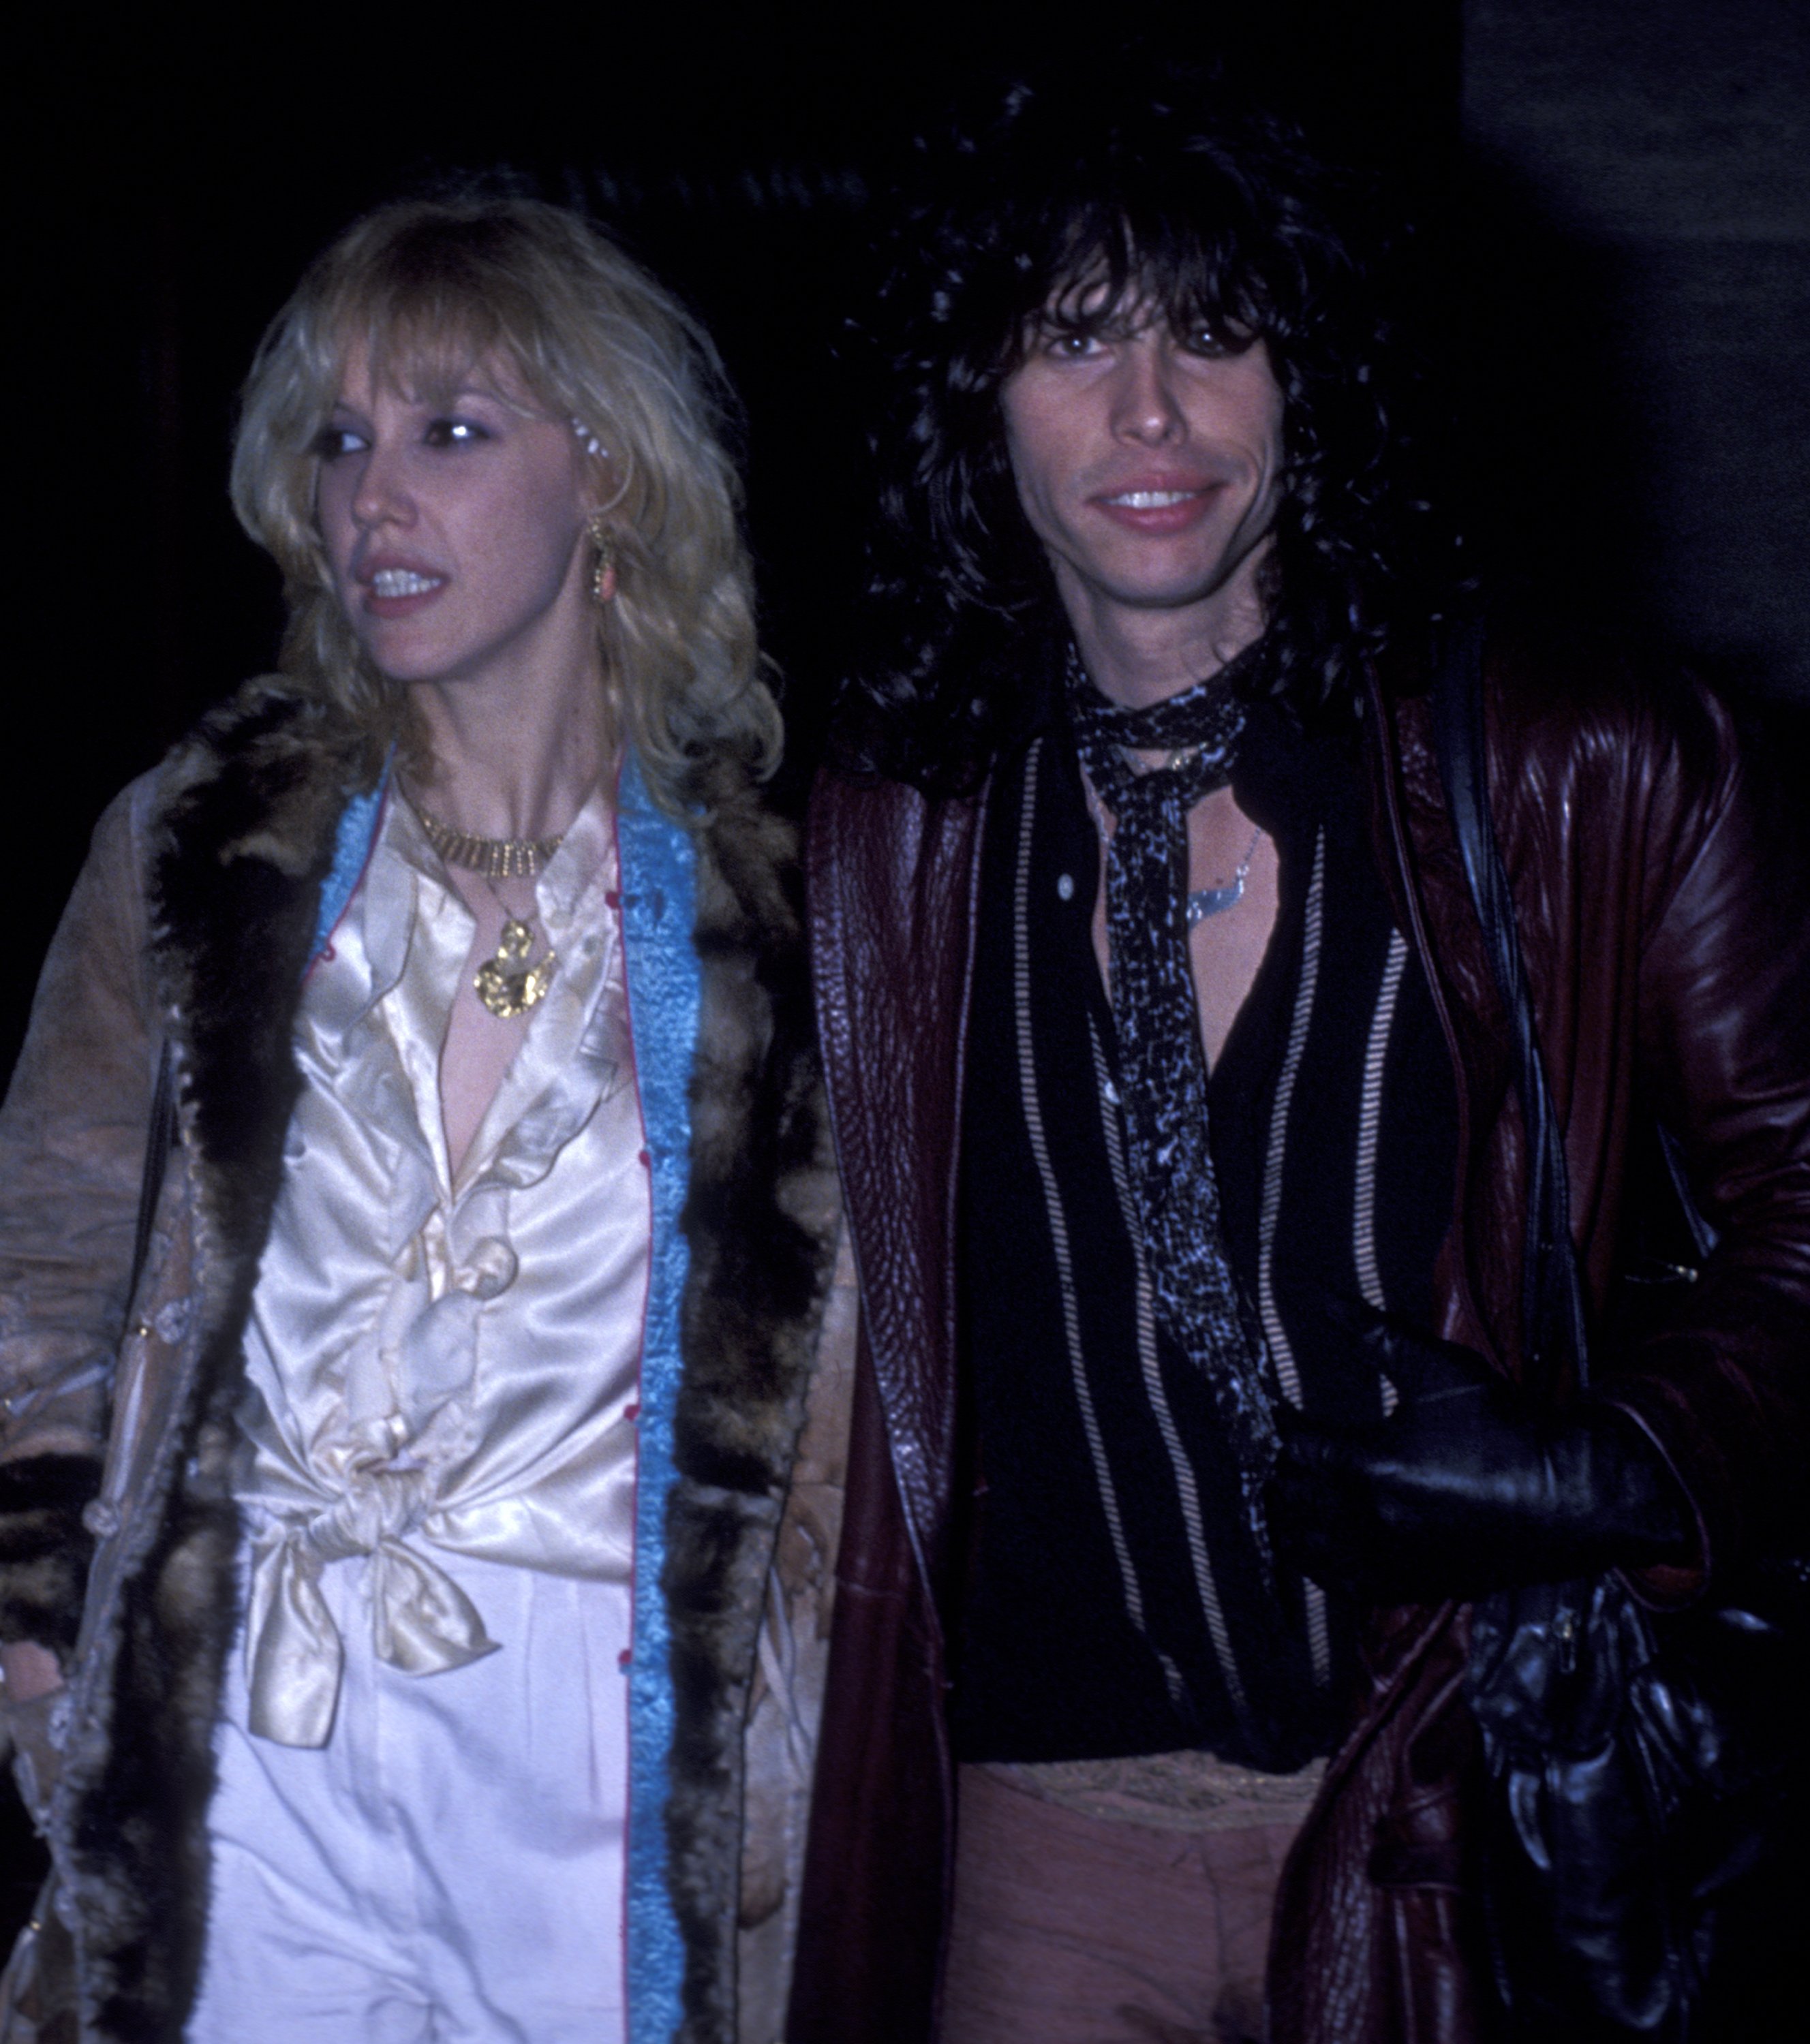 Steven Tyler and Cyrinda Foxe are photographed at the opening party for "Beatlemania" on January 18, 1978, at Jade West Restaurant in New York City | Source: Getty Images